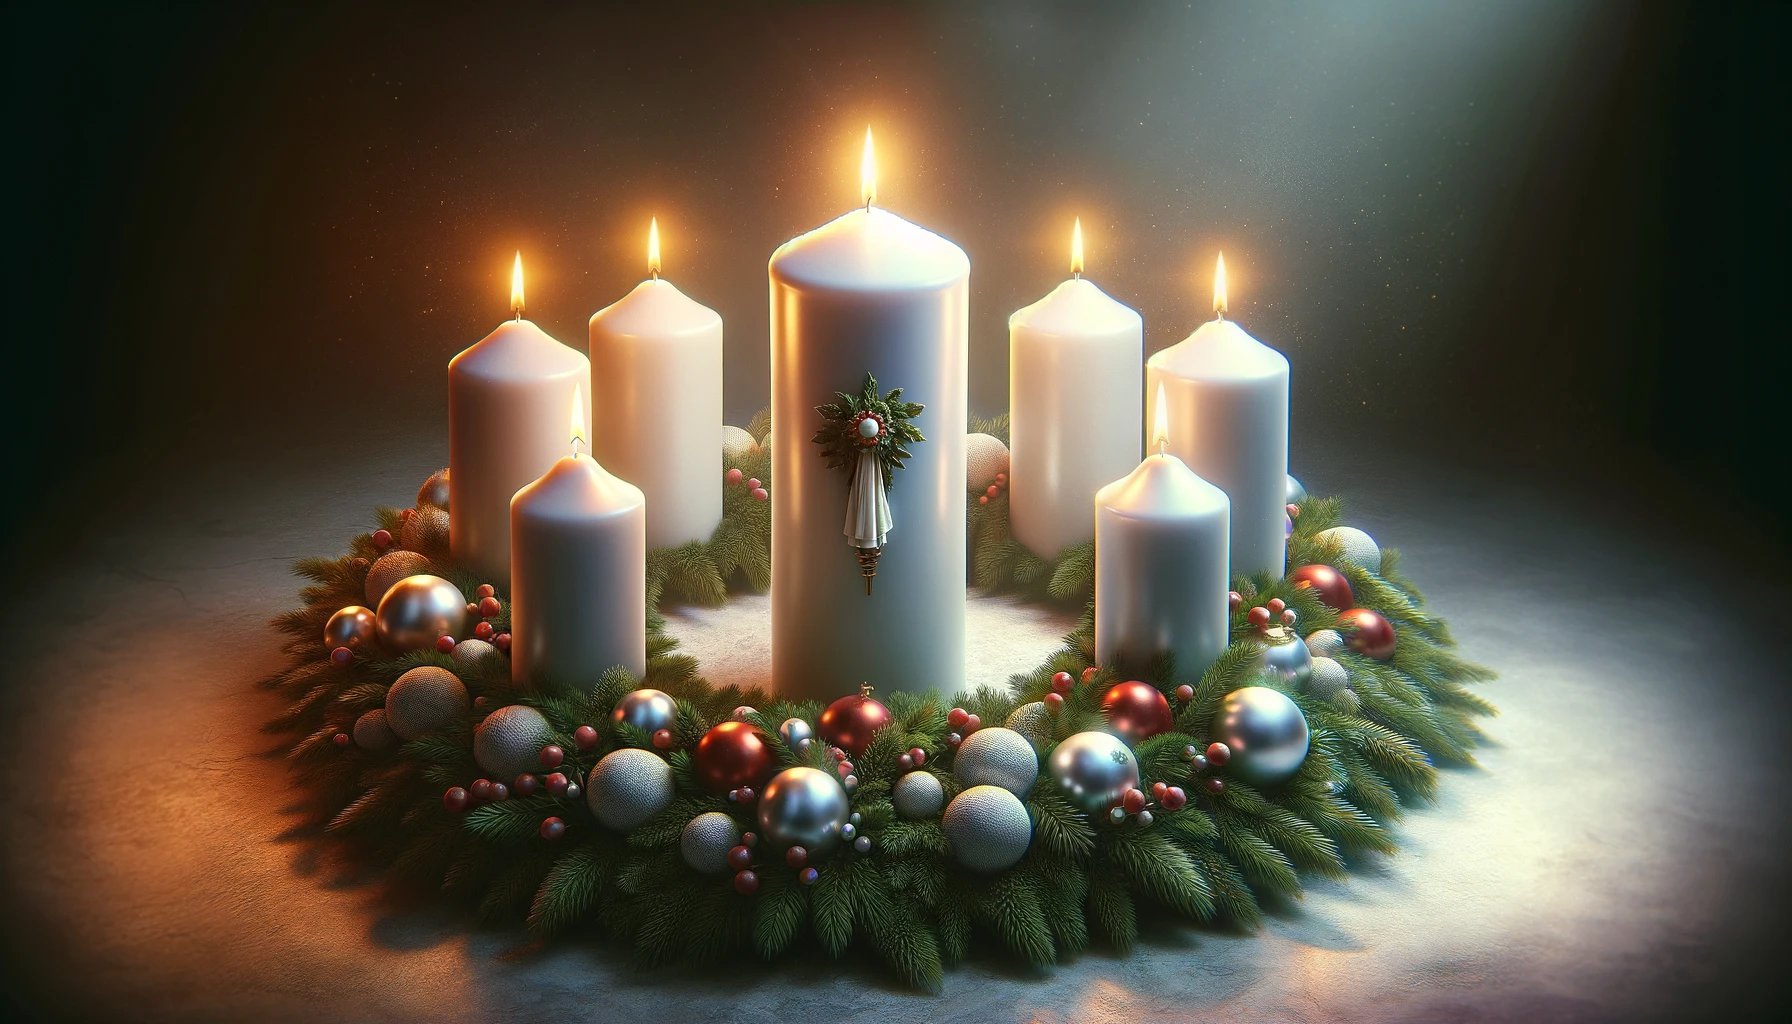 What Does The White Candle Mean In Advent